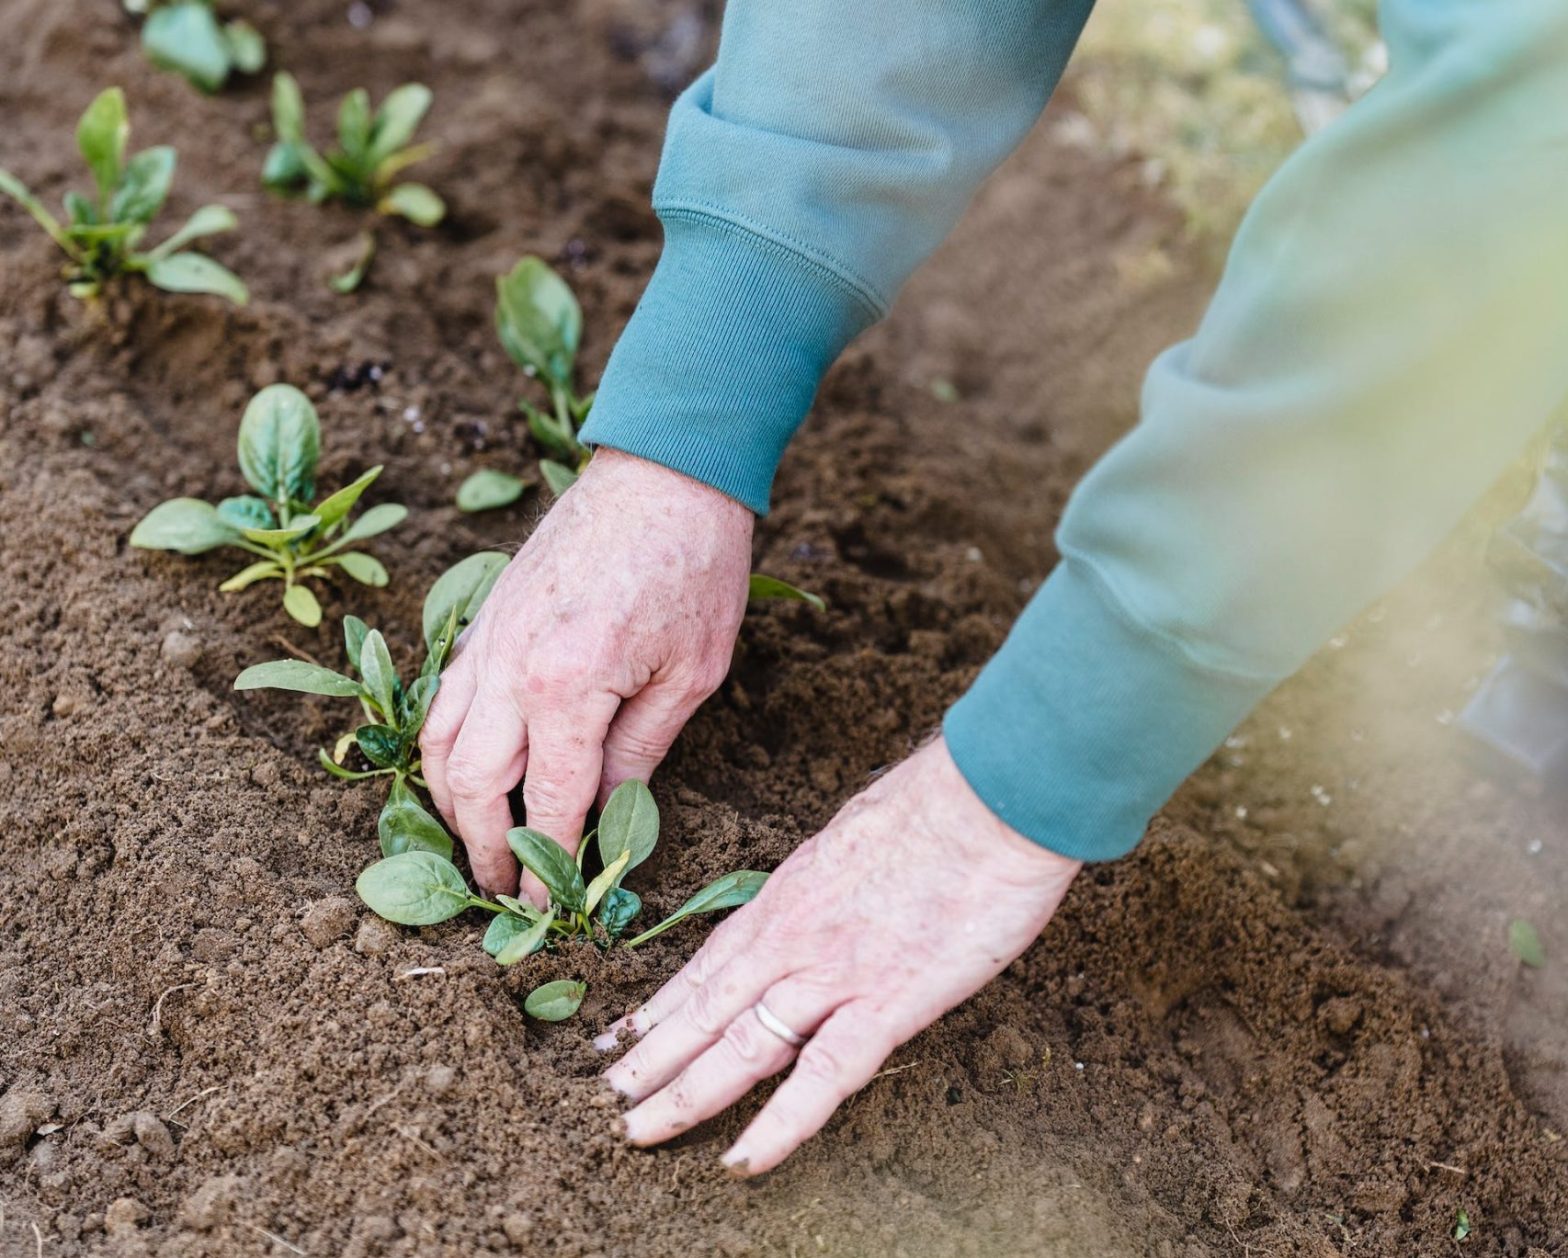 An image of a pair of hands planting crops. News - Indian River County Jail implements River Farms program to reduce recidivism among female inmates